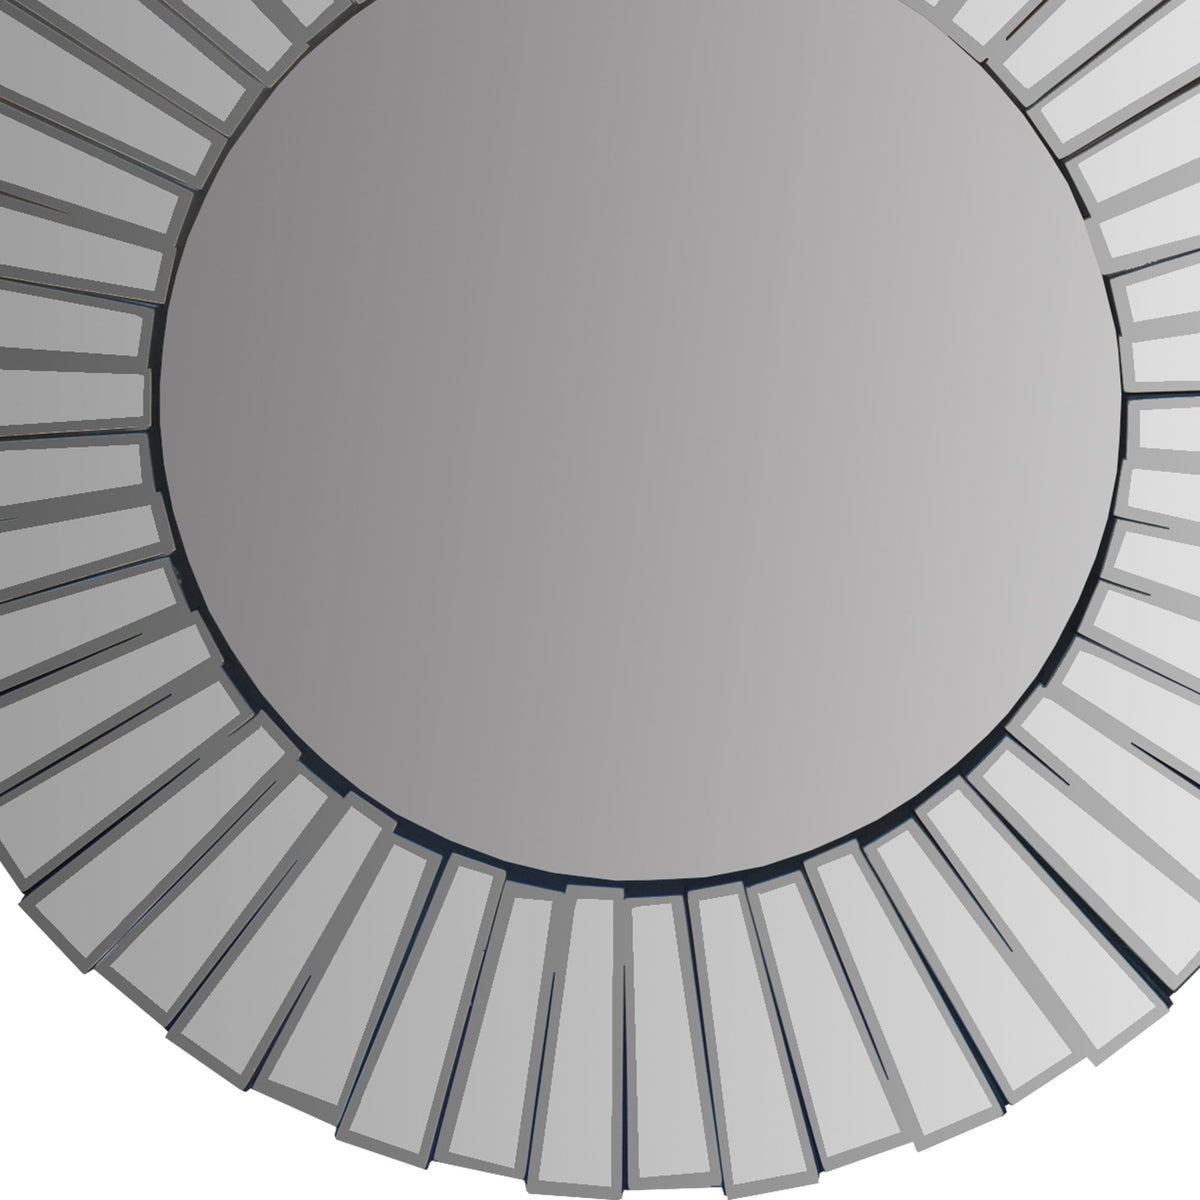 28 Inch Round Floating Wall Mirror with Mirrored Frame Work, Silver - UPT-226276